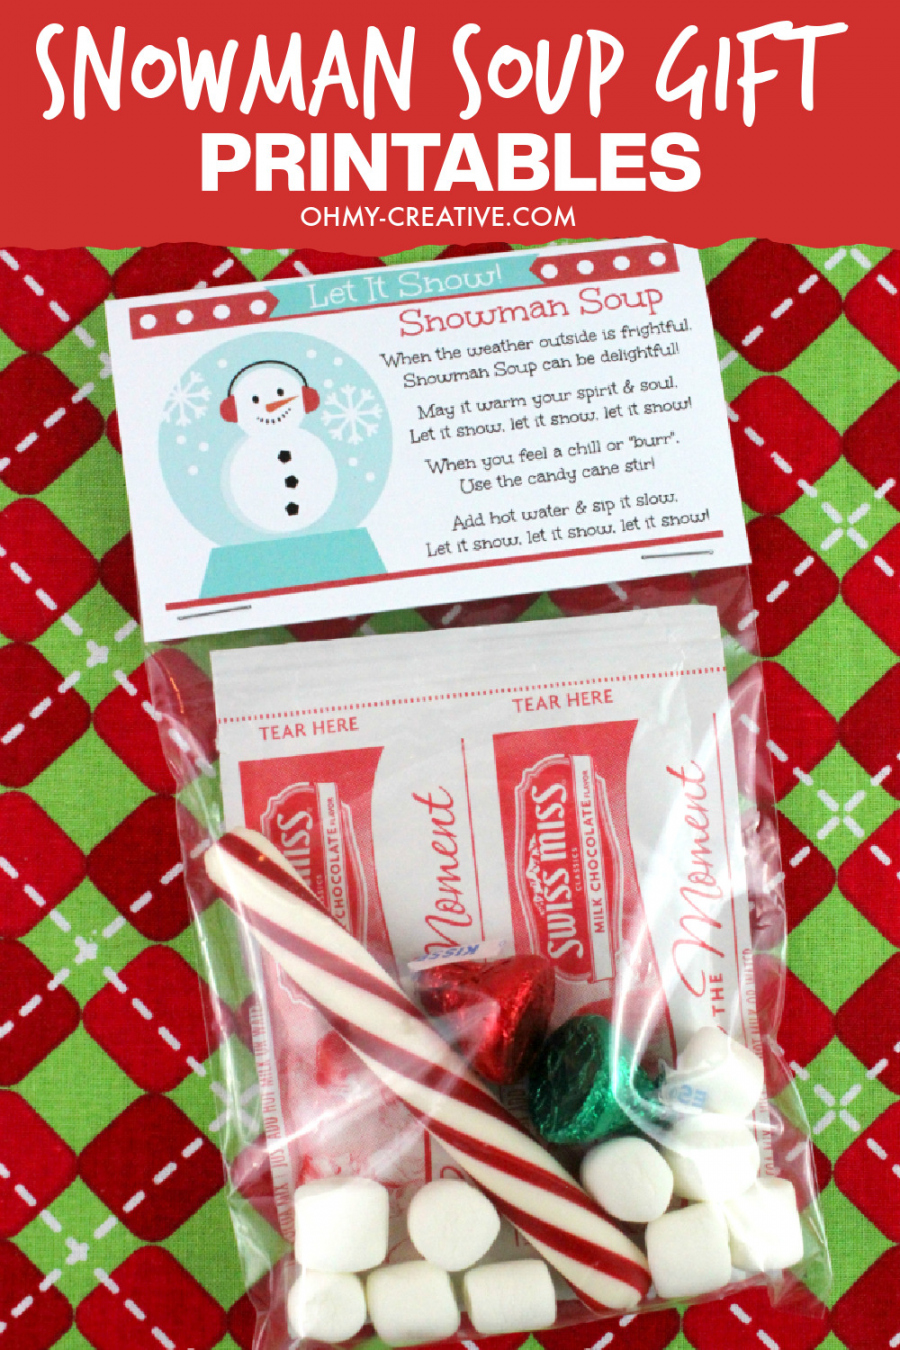 Snowman Soup Gift Recipe - Oh My Creative - FREE Printables - Snowman Soup Printable Free